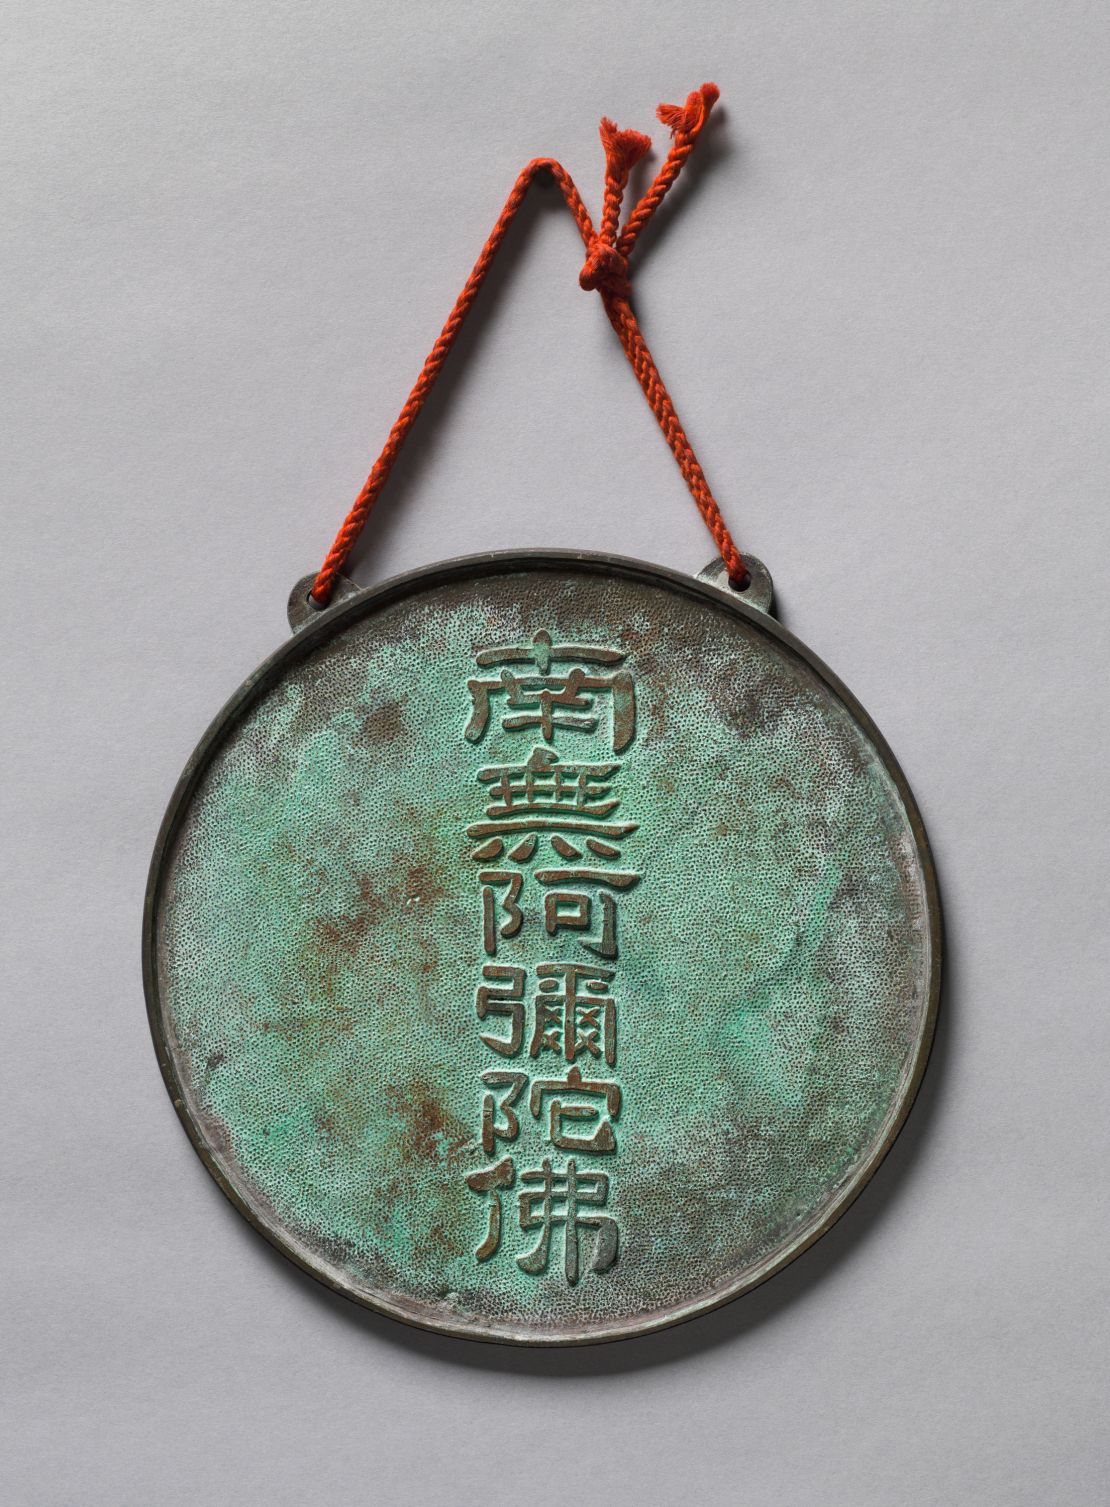 A second bronze plate, which is marked with the name of the Amitabha Buddha, is thought to have been soldered onto the back, concealing the image of the Buddha.